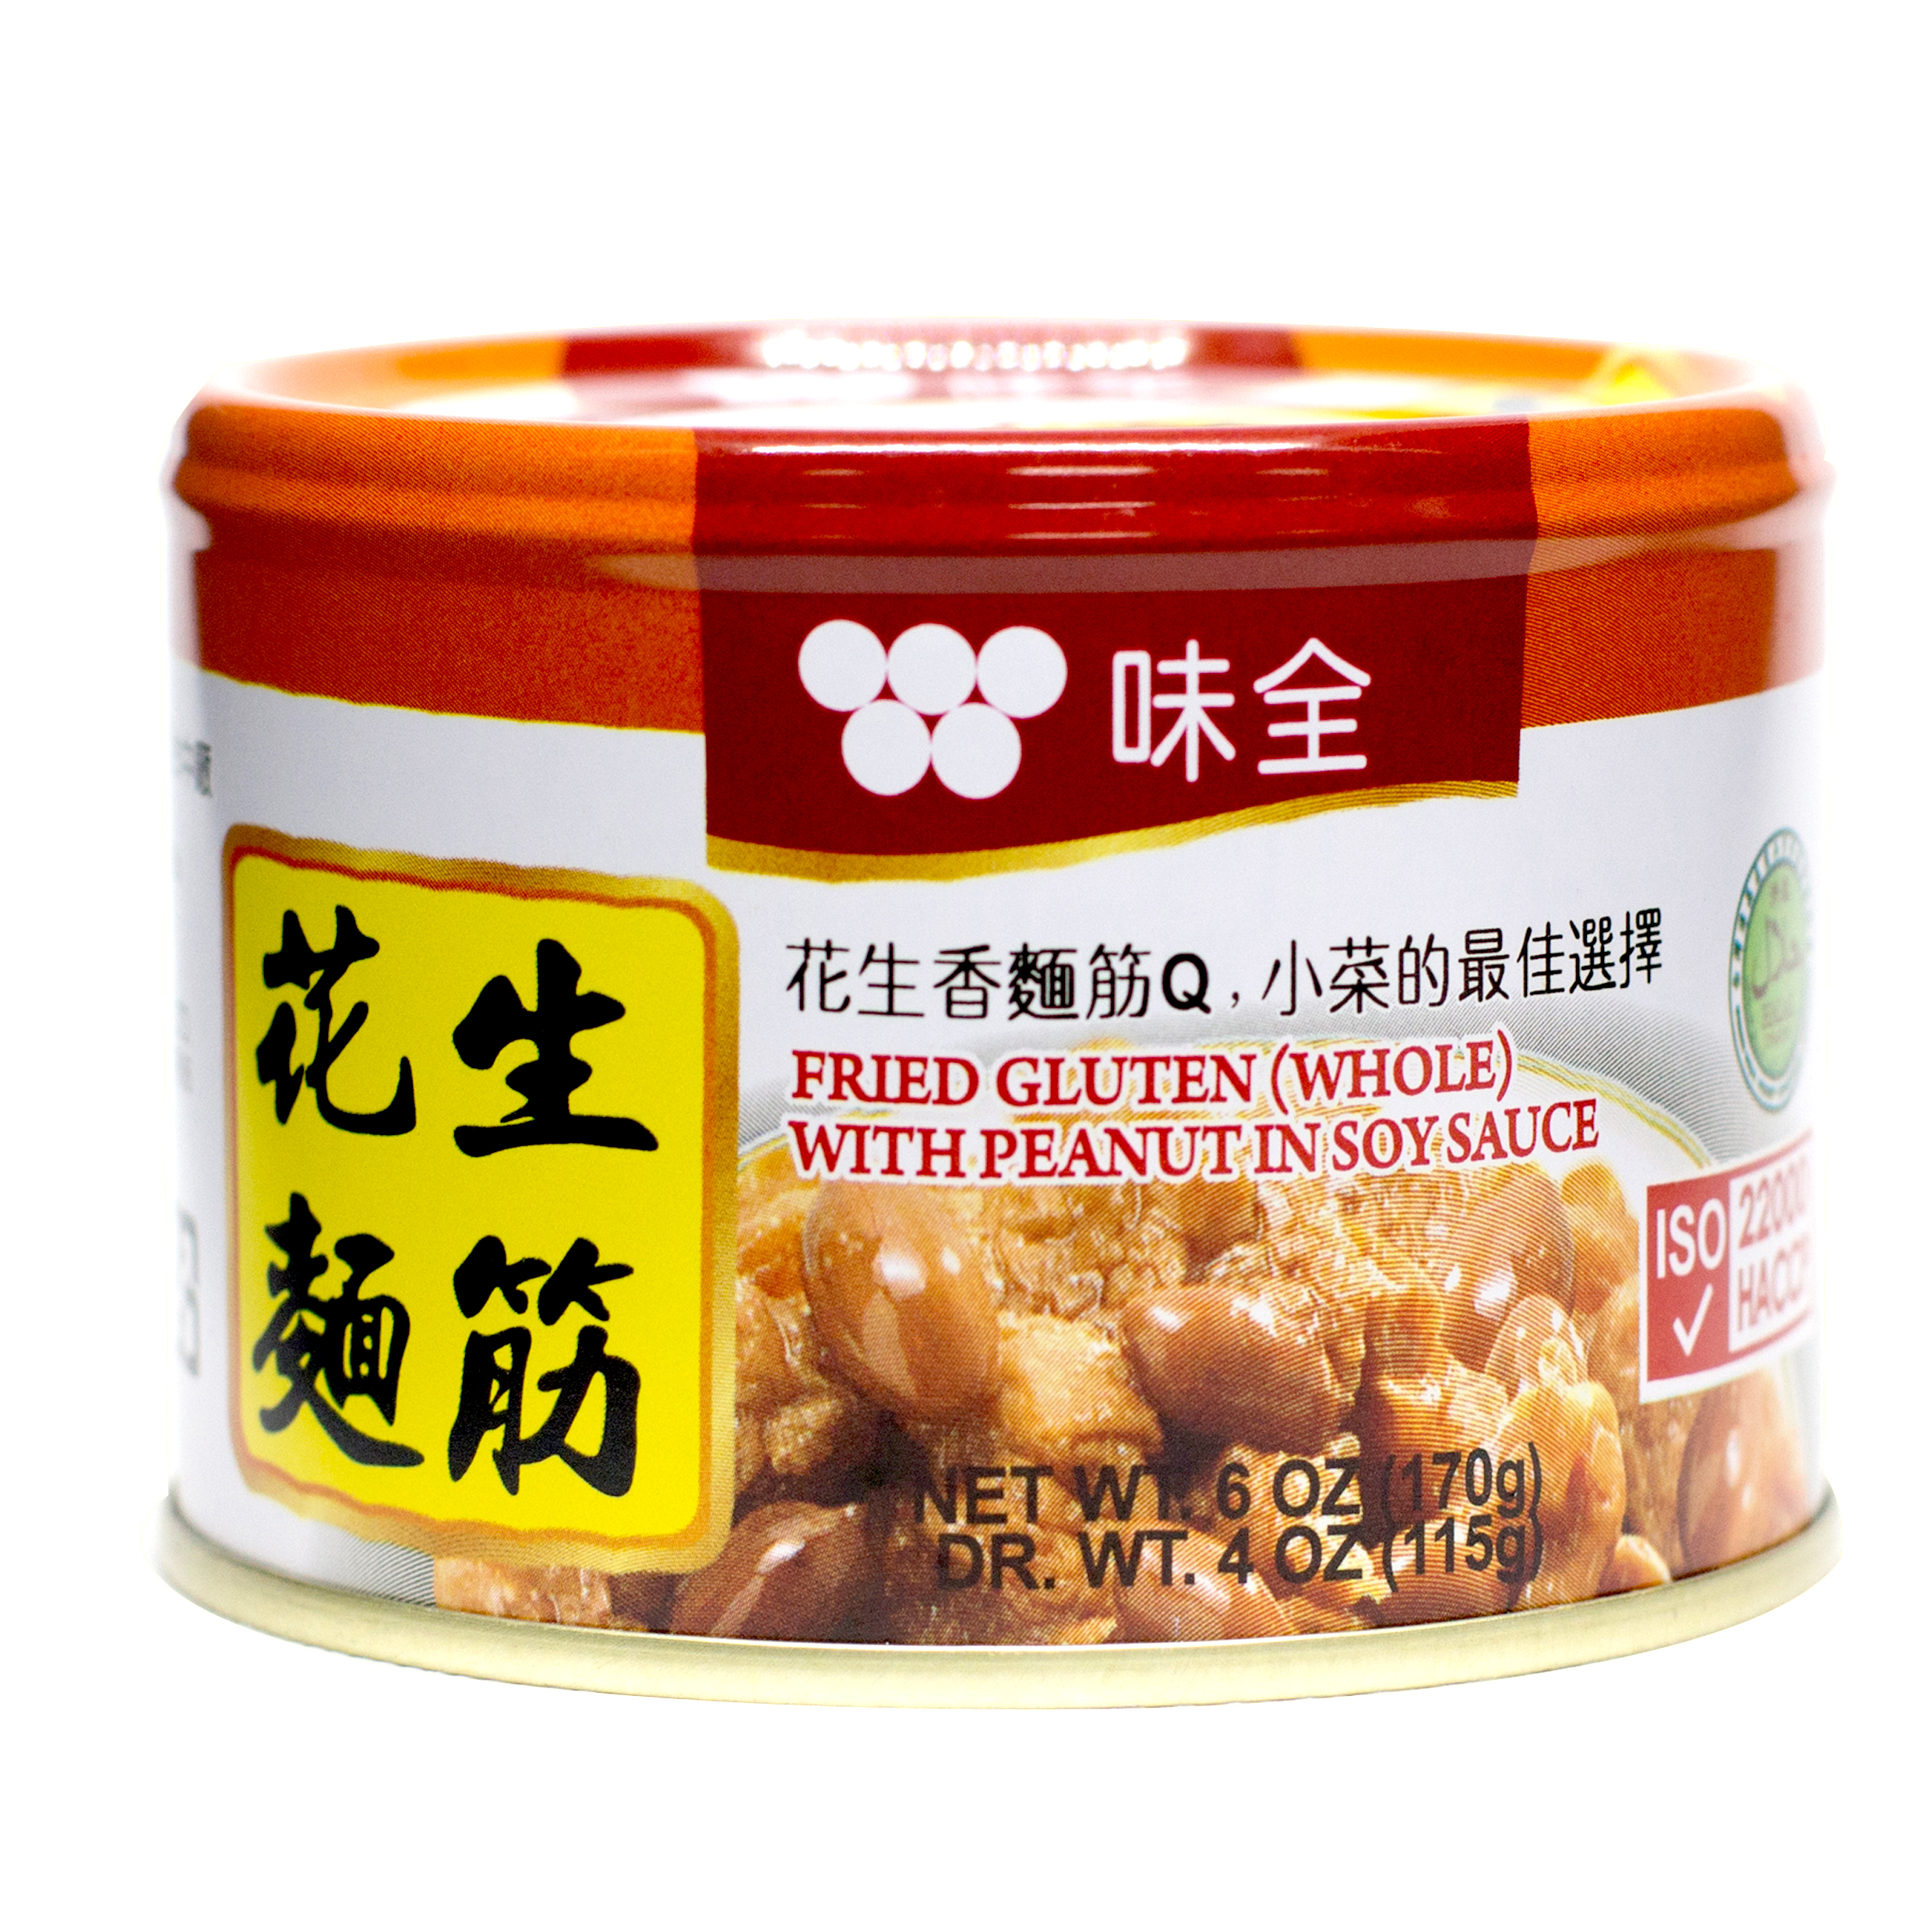 Image Fried Gluten With Peanuts 味全 - 花生面筋 170grams